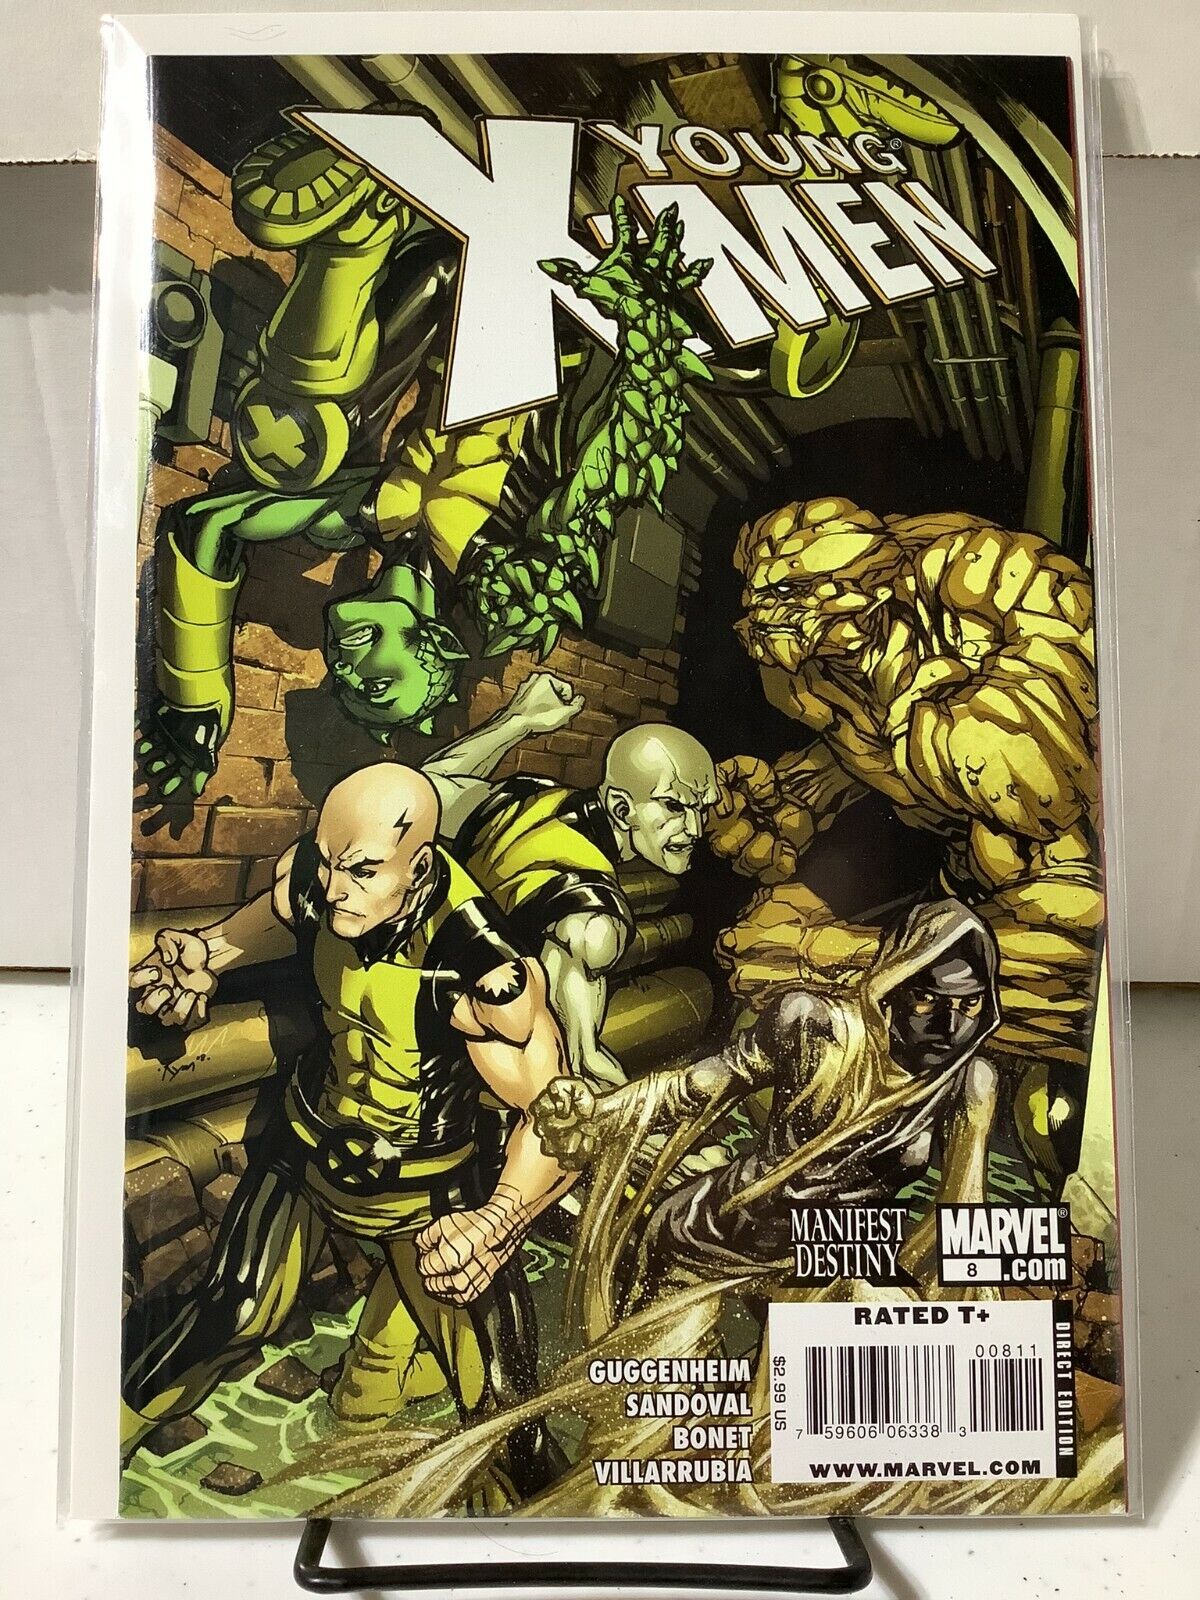 Young X-Men #8 - #12 - VF-NM - New Unread Unopened - Combined Shipping Available